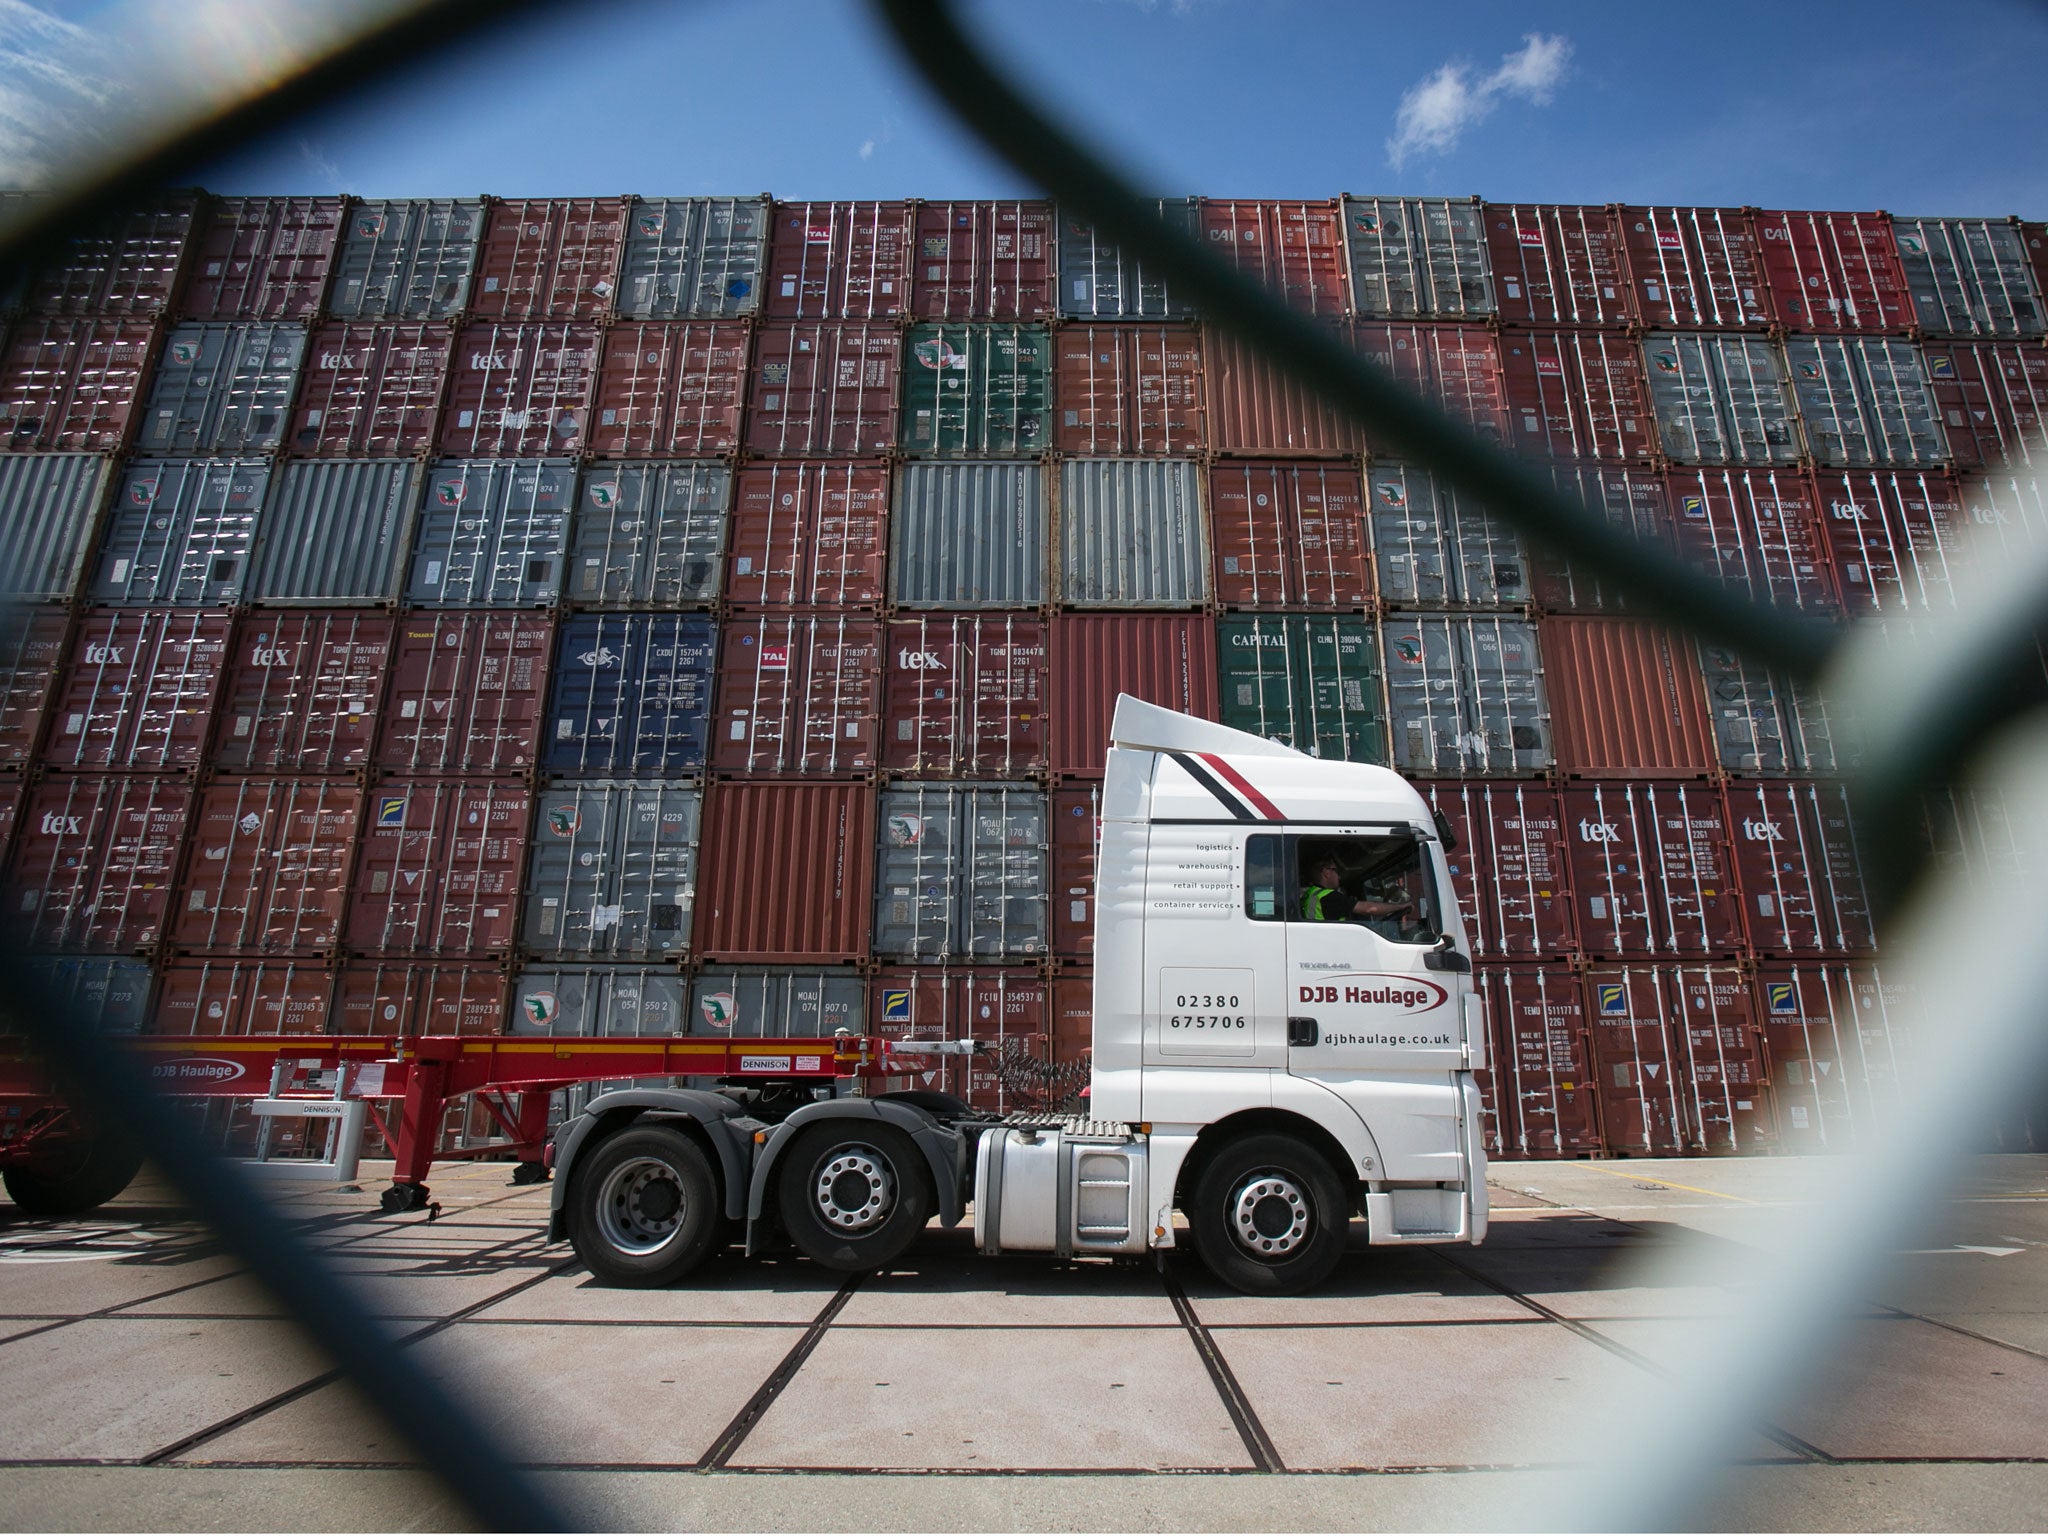 Exports of goods fell by £14.6 billion from the previous year